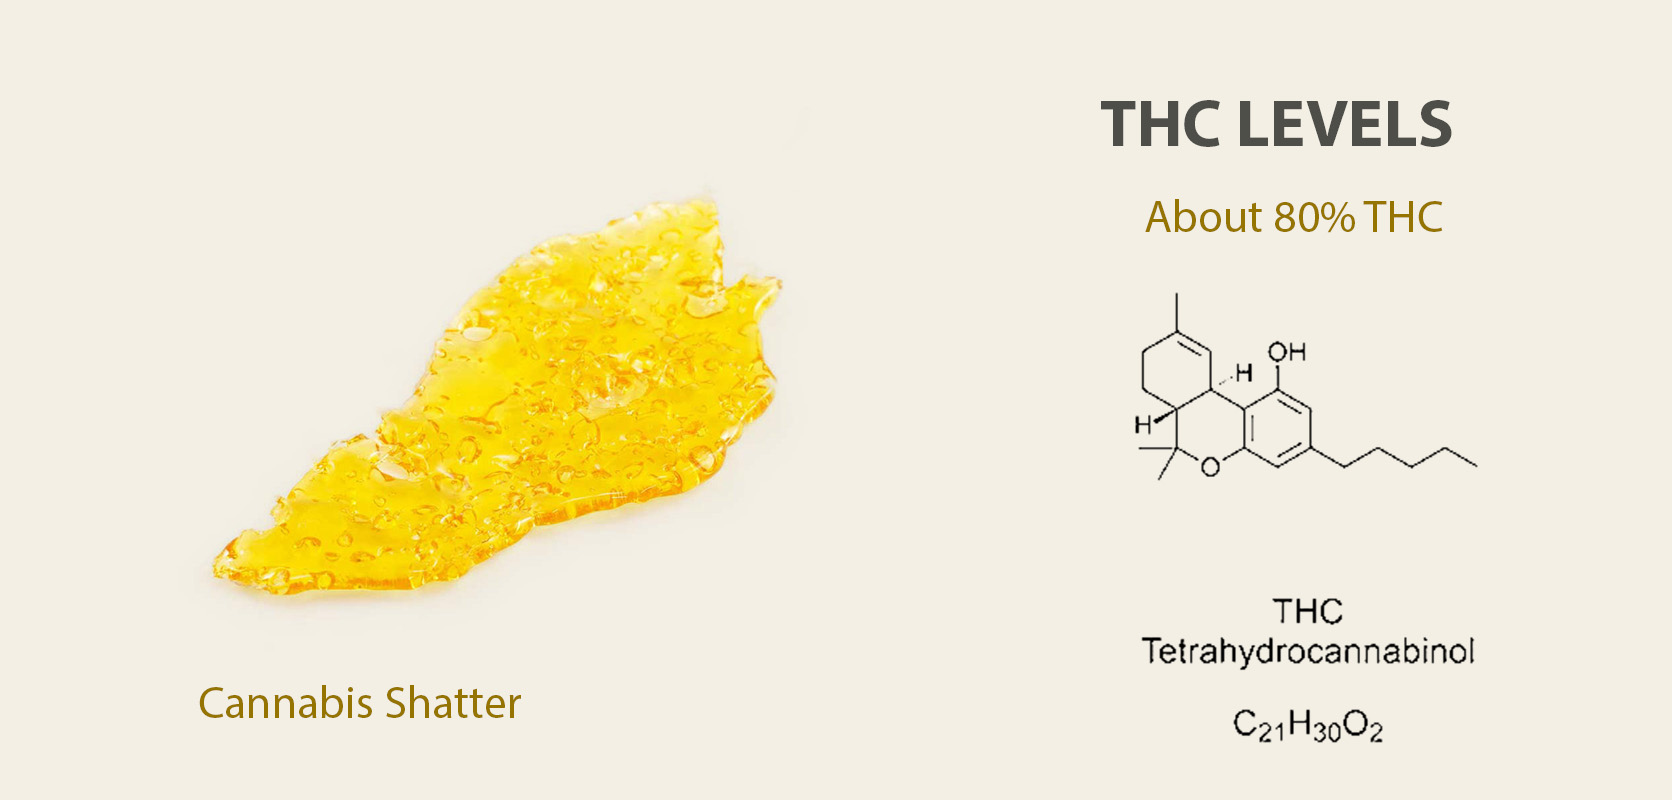 shatter weed and cannabis shatter from low price bud dispensary for cannabis concentrates and vape pens. Is shatter worth it? buy shatter online in Canada.